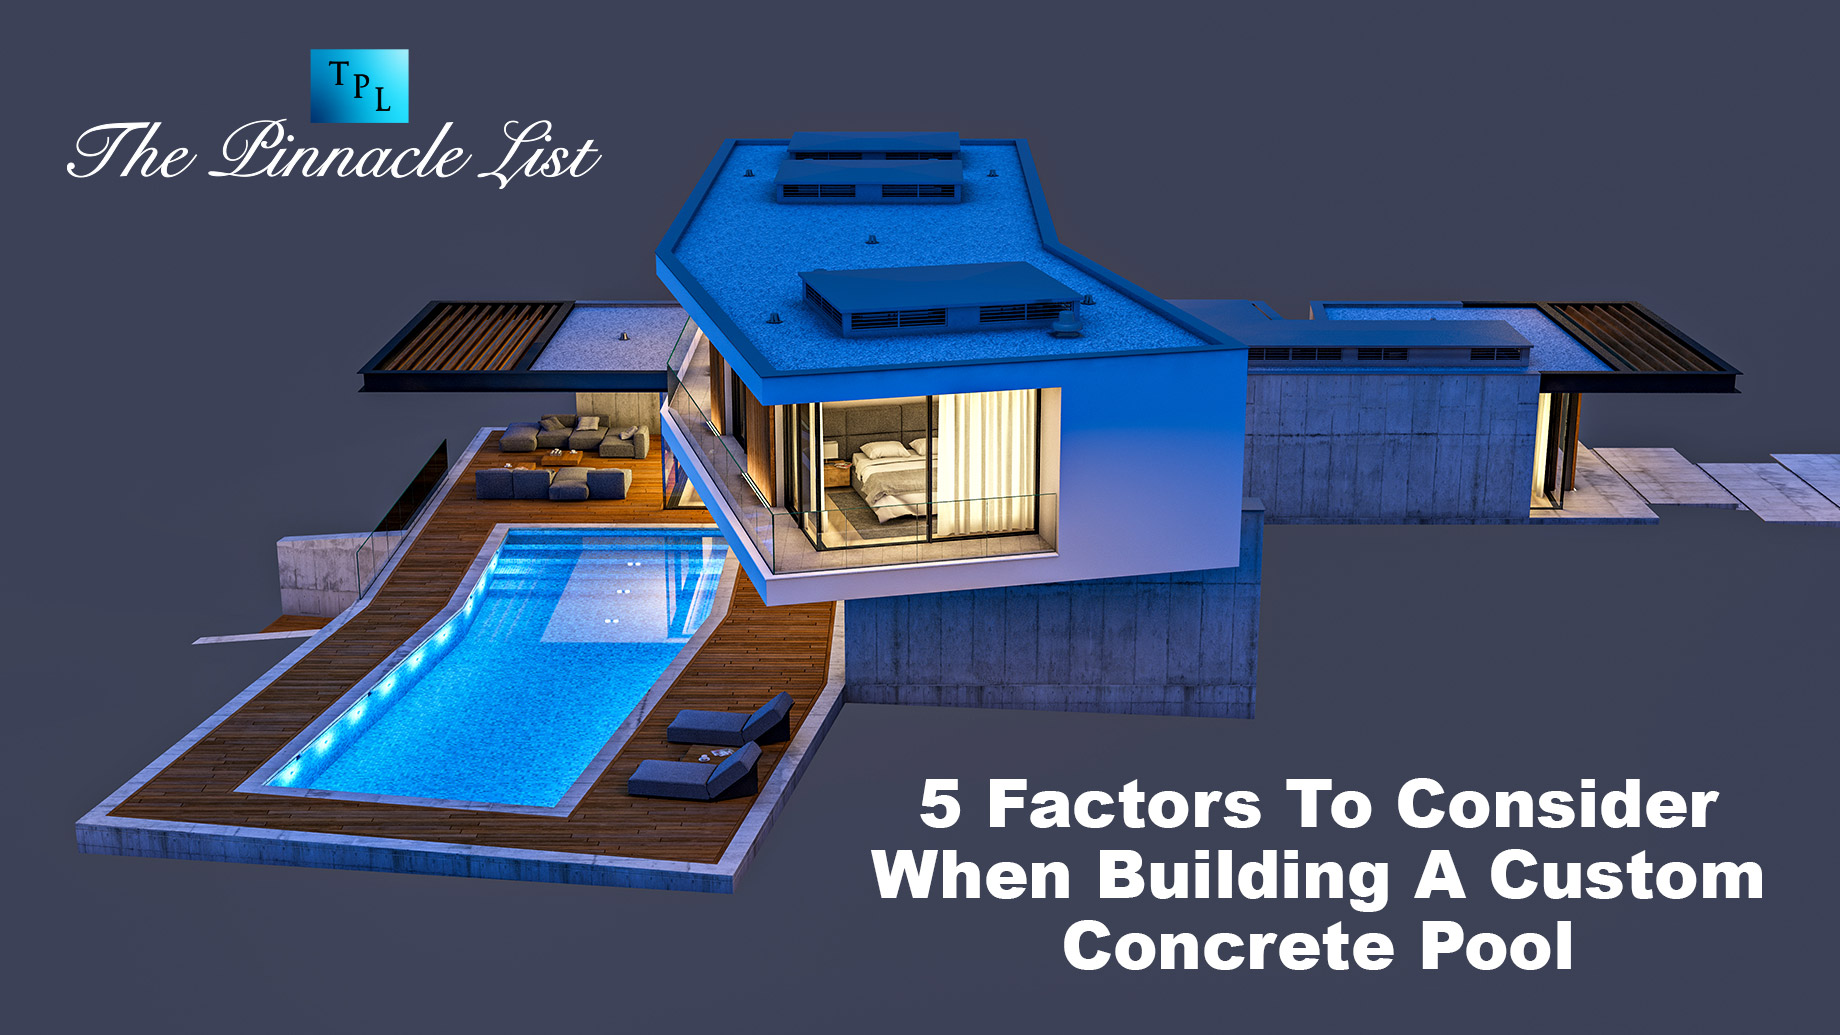 5 Factors To Consider When Building A Custom Concrete Pool